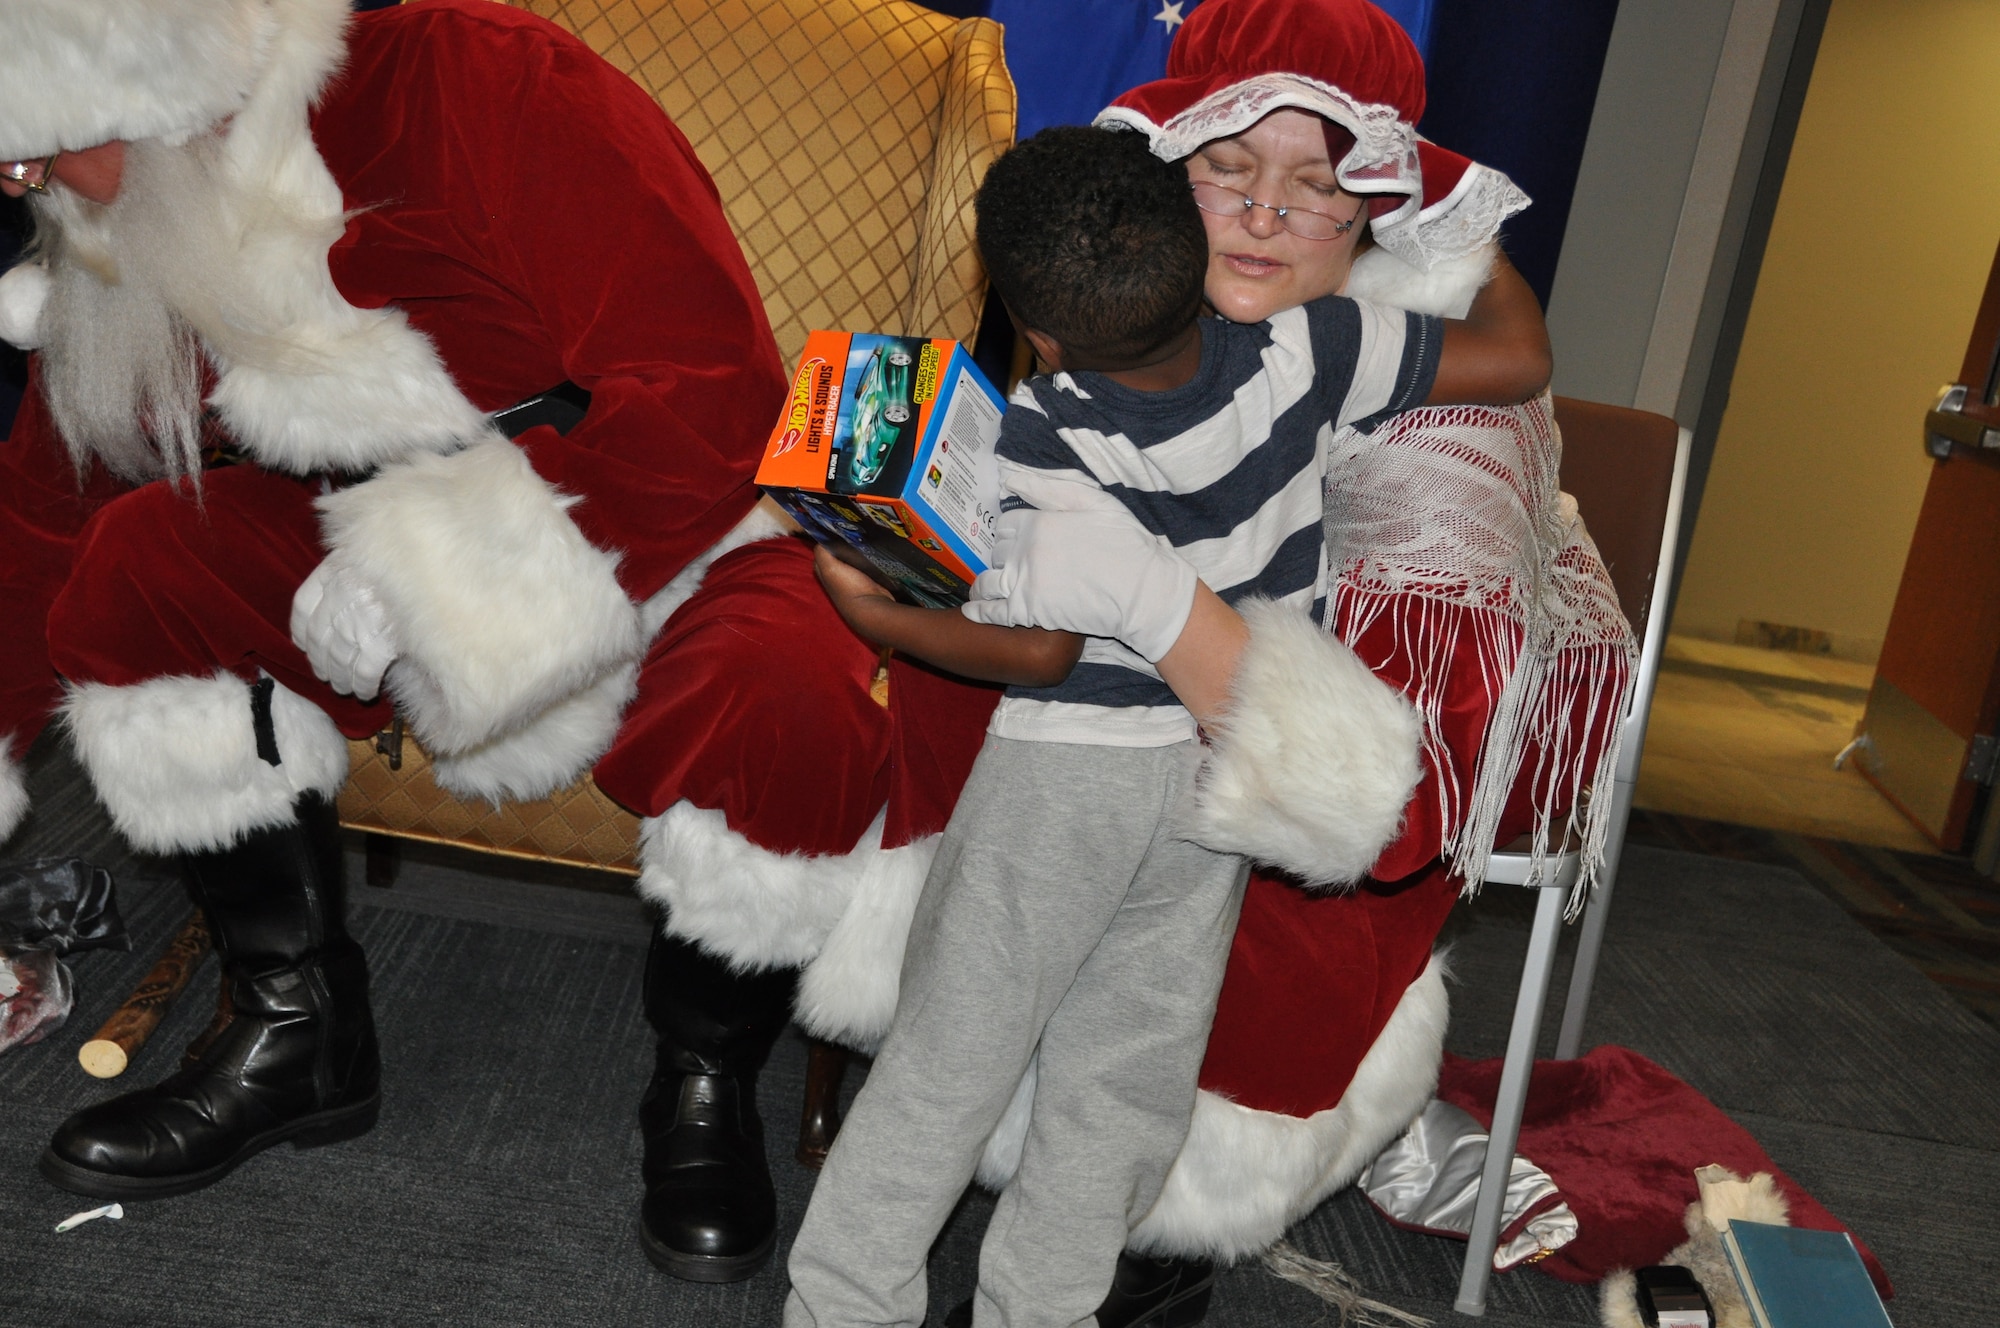 Mrs. Claus hugs a child during her visit to the Air Reserve Personnel Center Dec. 19, 2014, on Buckley Air Force Base, Colo. Brig. Gen. Samuel "Bo" Mahaney, ARPC commander, introduced Santa Claus, Mrs. Claus and Sparkle the elf to excited families and children as he discussed the relationship with Santa Claus and the Air Force, which dates back decades. (U.S. Air Force photo/Tech. Sgt. Rob Hazelett)